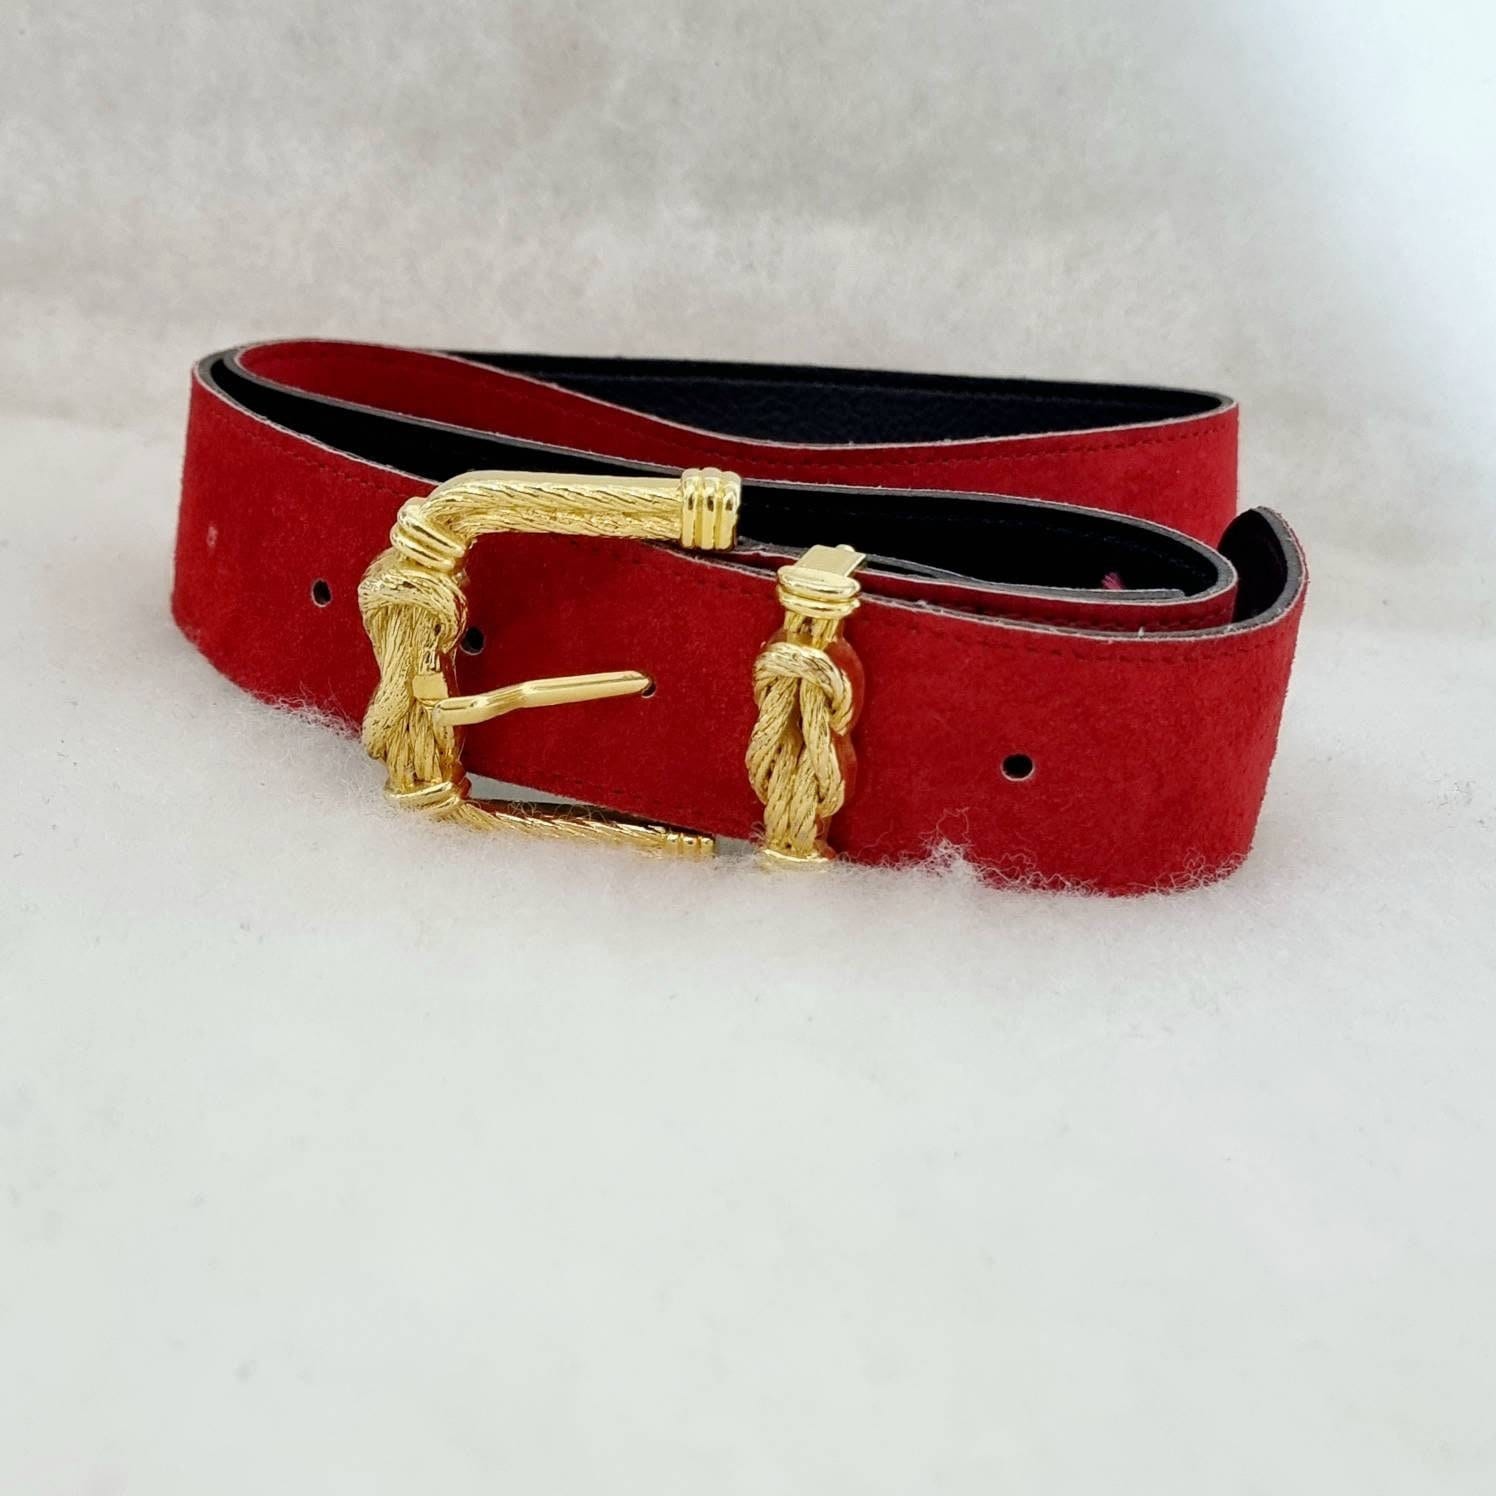 Gucci woman belt plain leather red with GG buckle 3.0cm